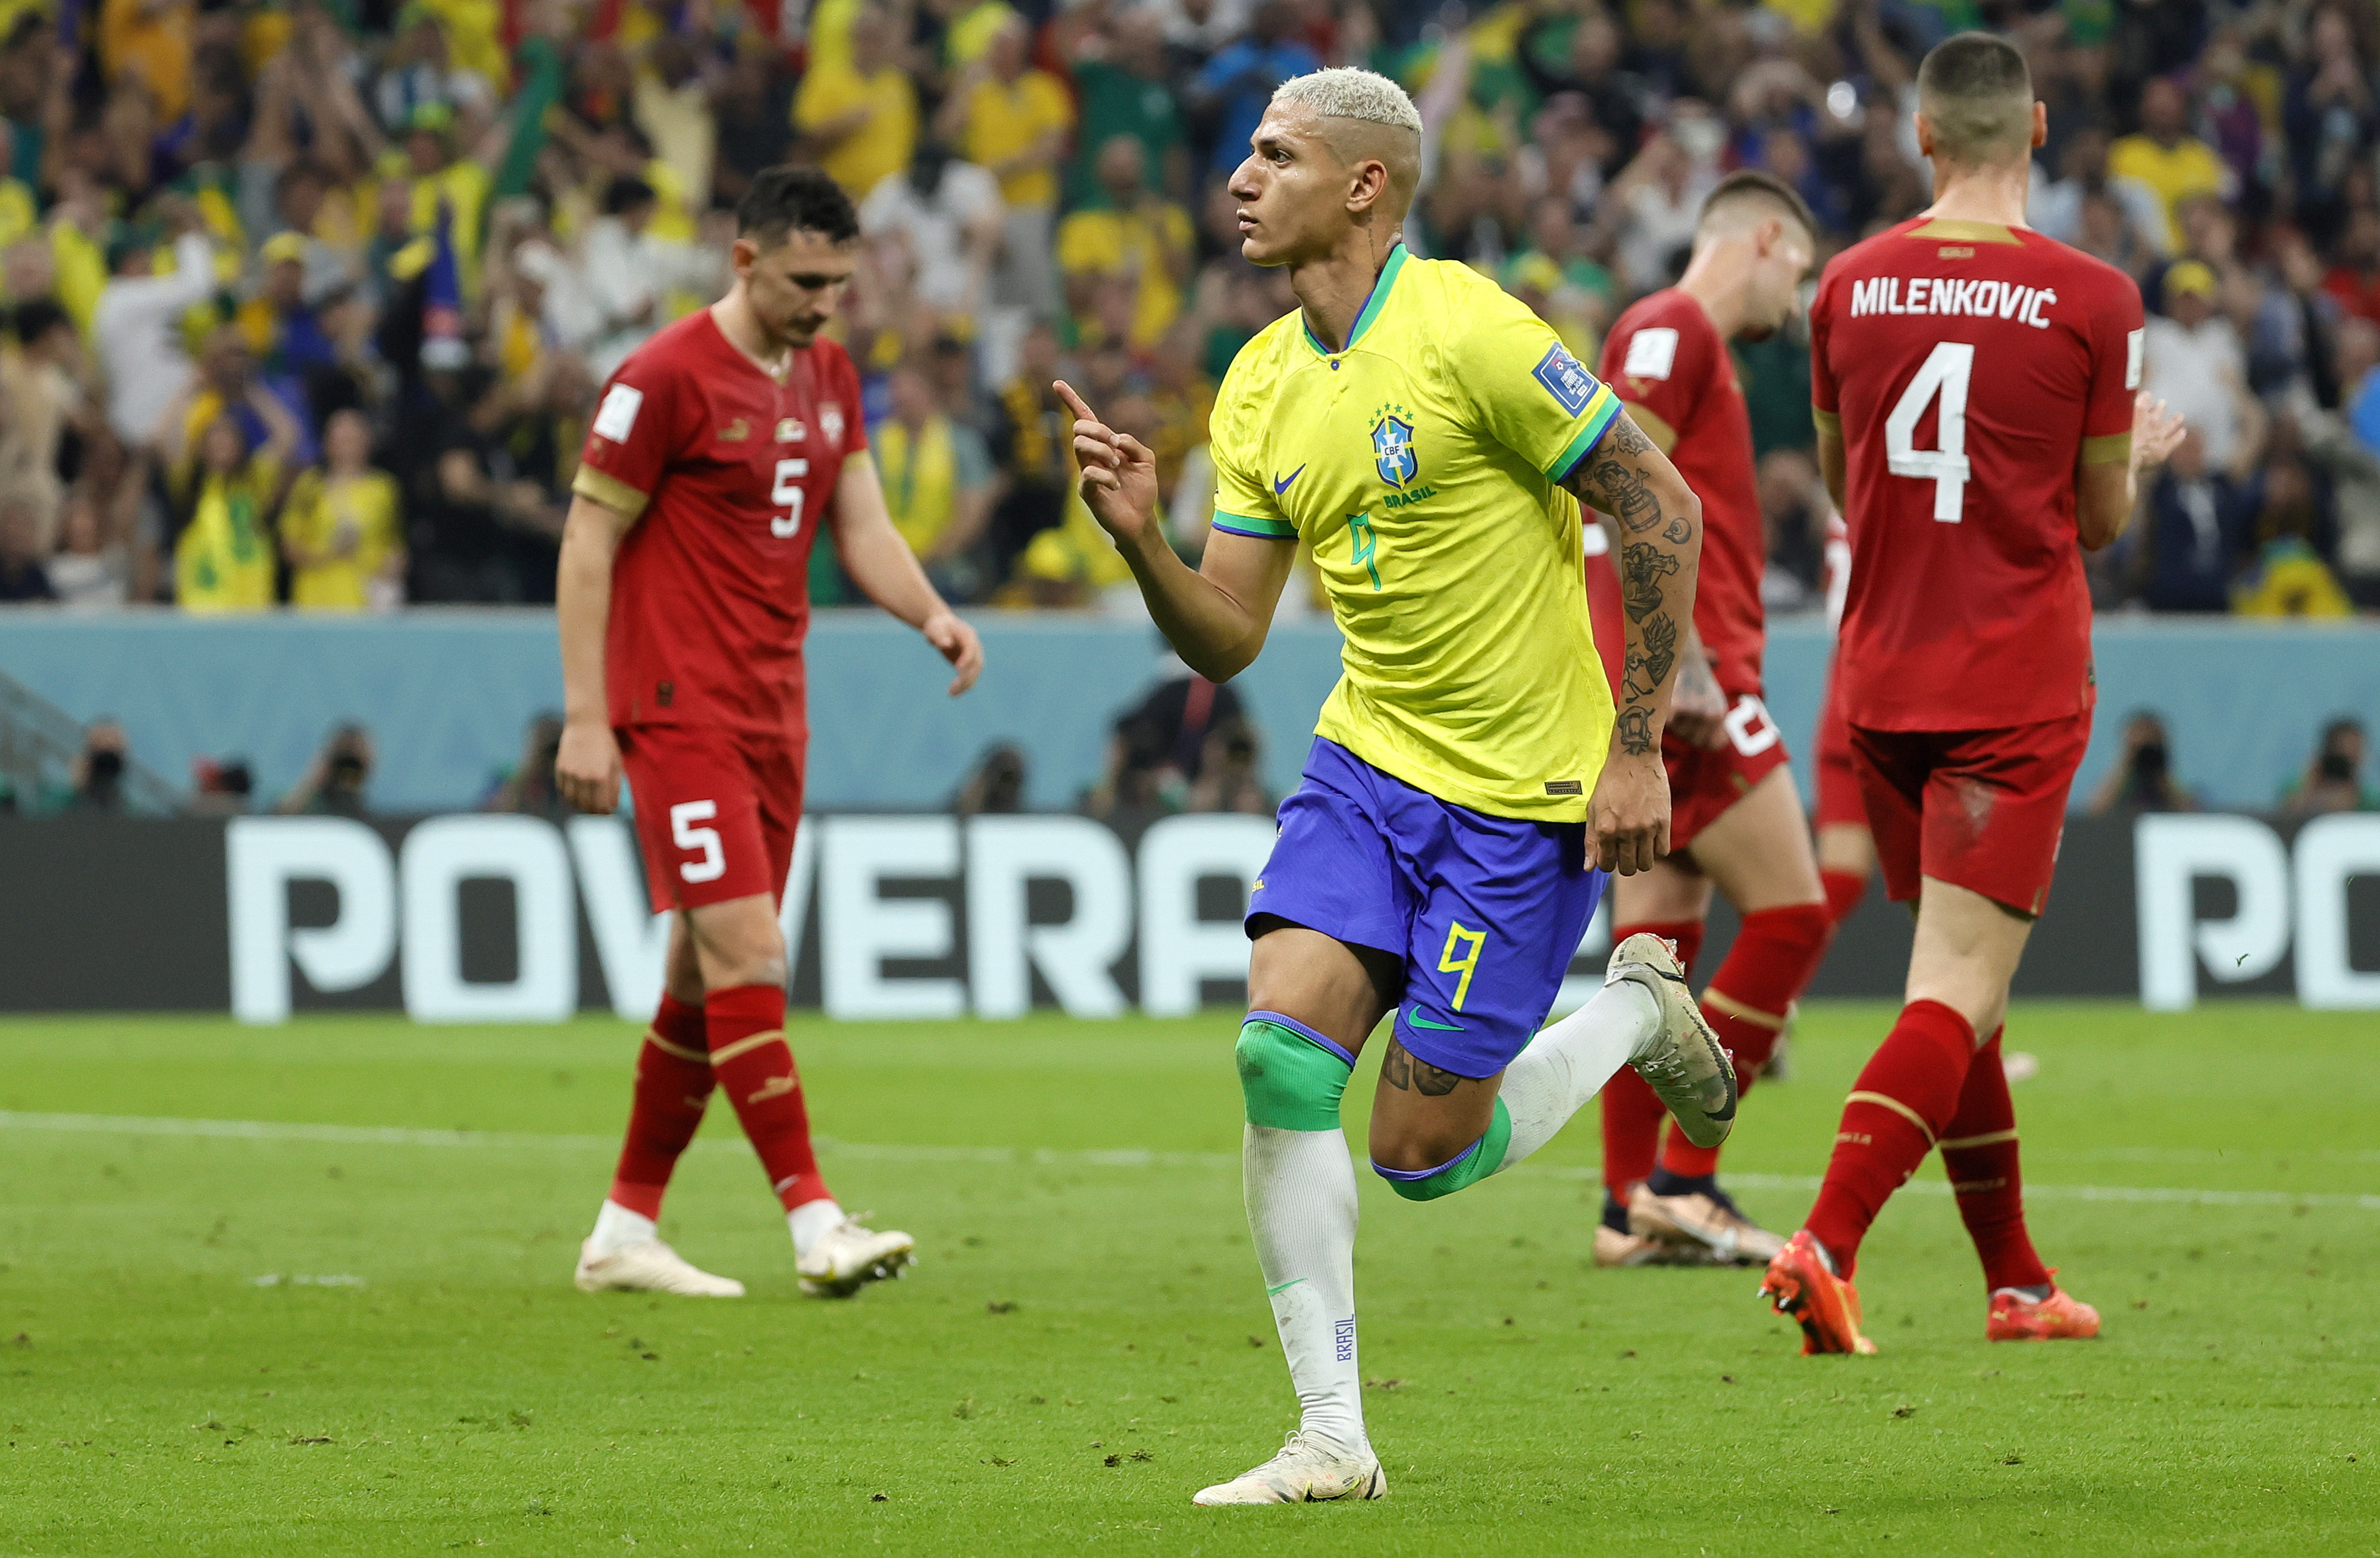 Brazil's Richarlison to 'seek psychological help' after World Cup  qualifying woes, aims to come back stronger 